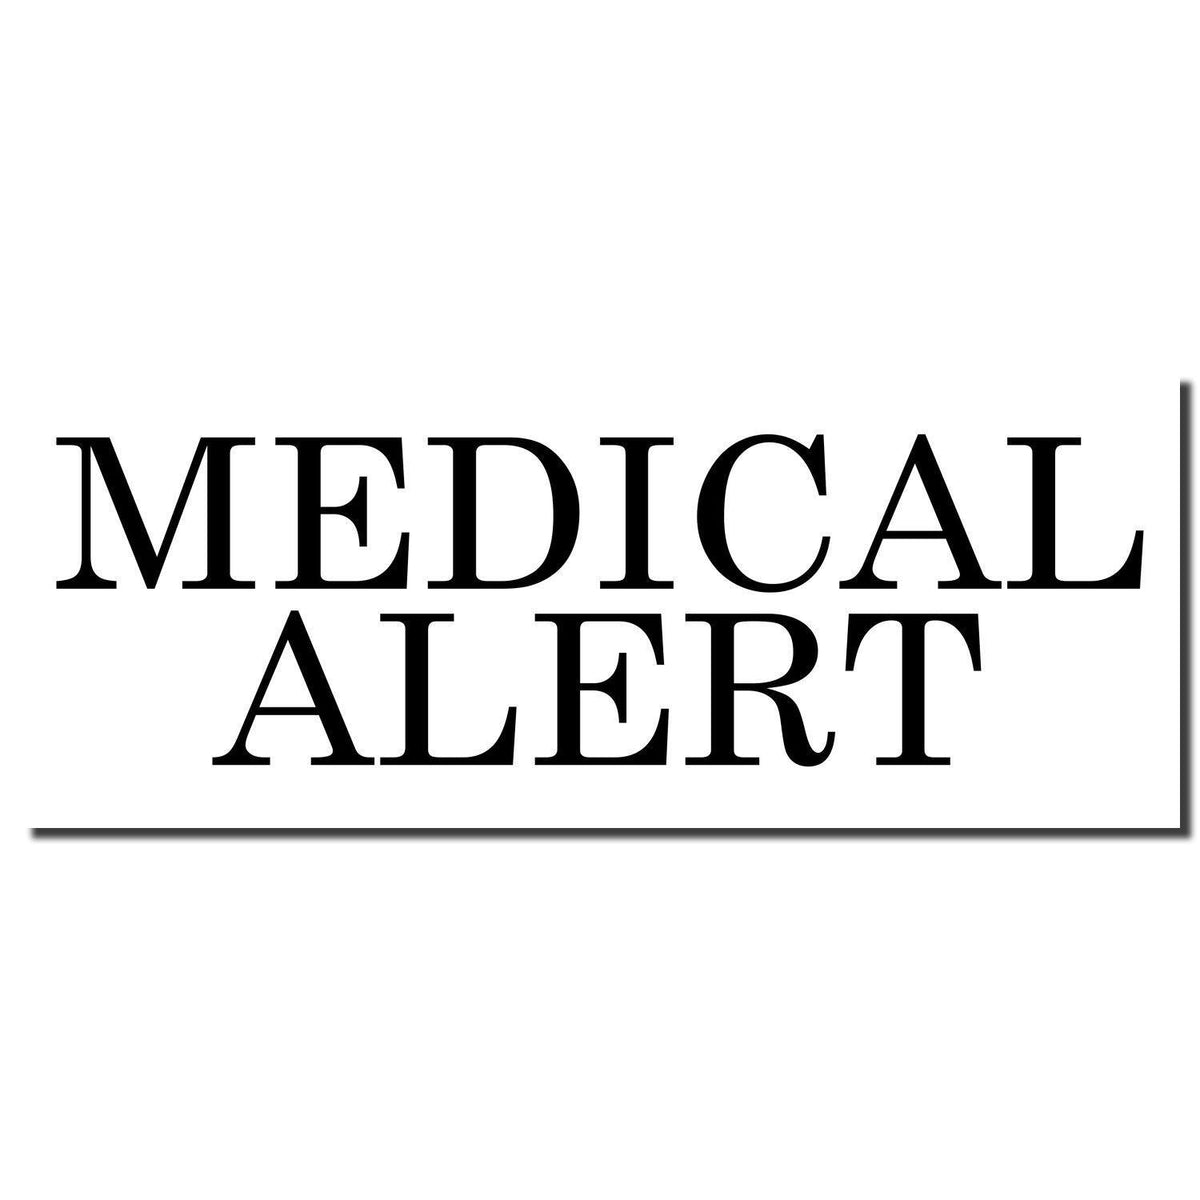 Medical Alert Rubber Stamp - Engineer Seal Stamps - Brand_Acorn, Impression Size_Small, Stamp Type_Regular Stamp, Type of Use_Medical Office